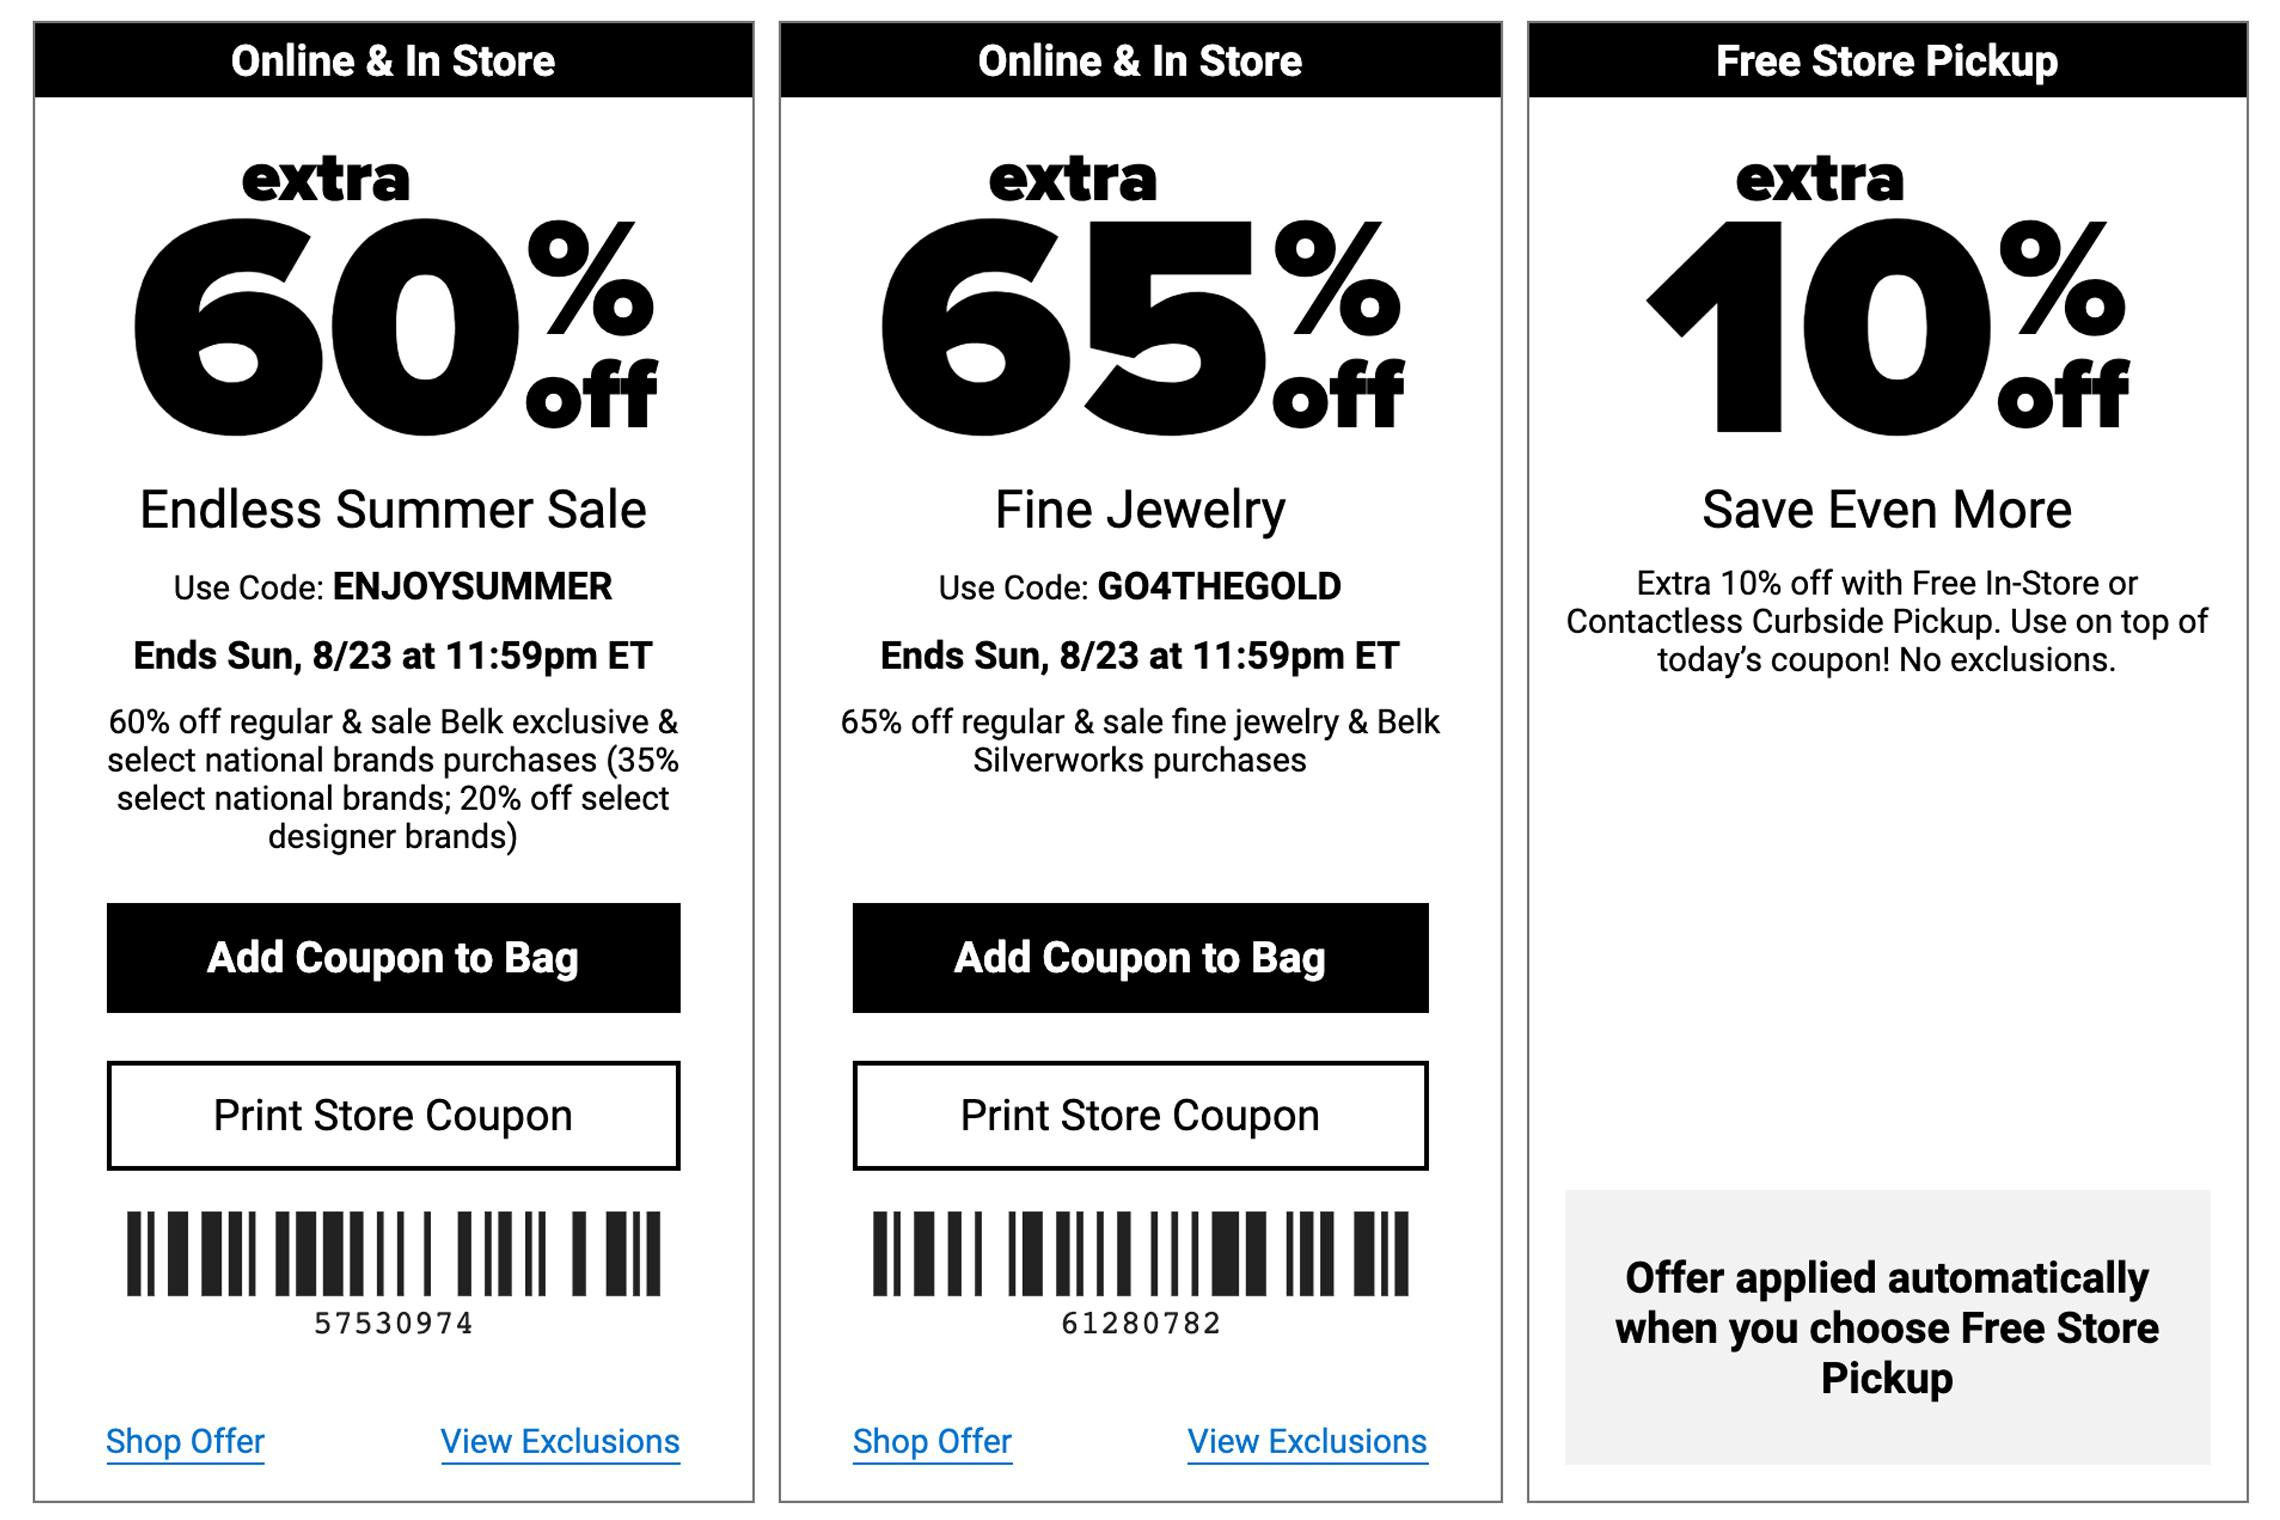 17 Belk Coupon Shopping Tips To Save You Money Online And In Store The Krazy Coupon Lady